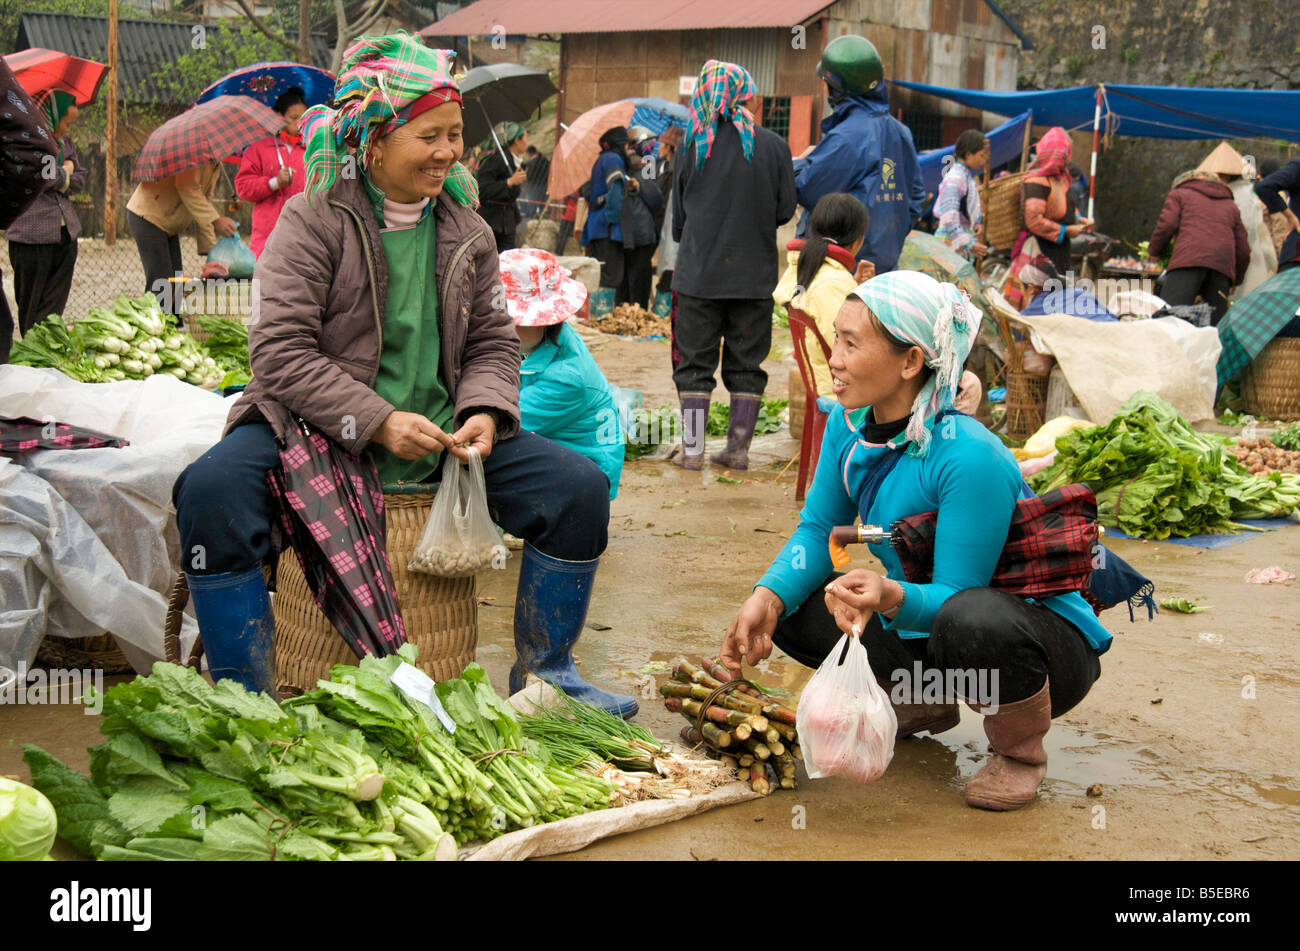 Two happy tribal women laughing on a fresh vegetable stall in Sapa Northern Vietnamese market Stock Photo